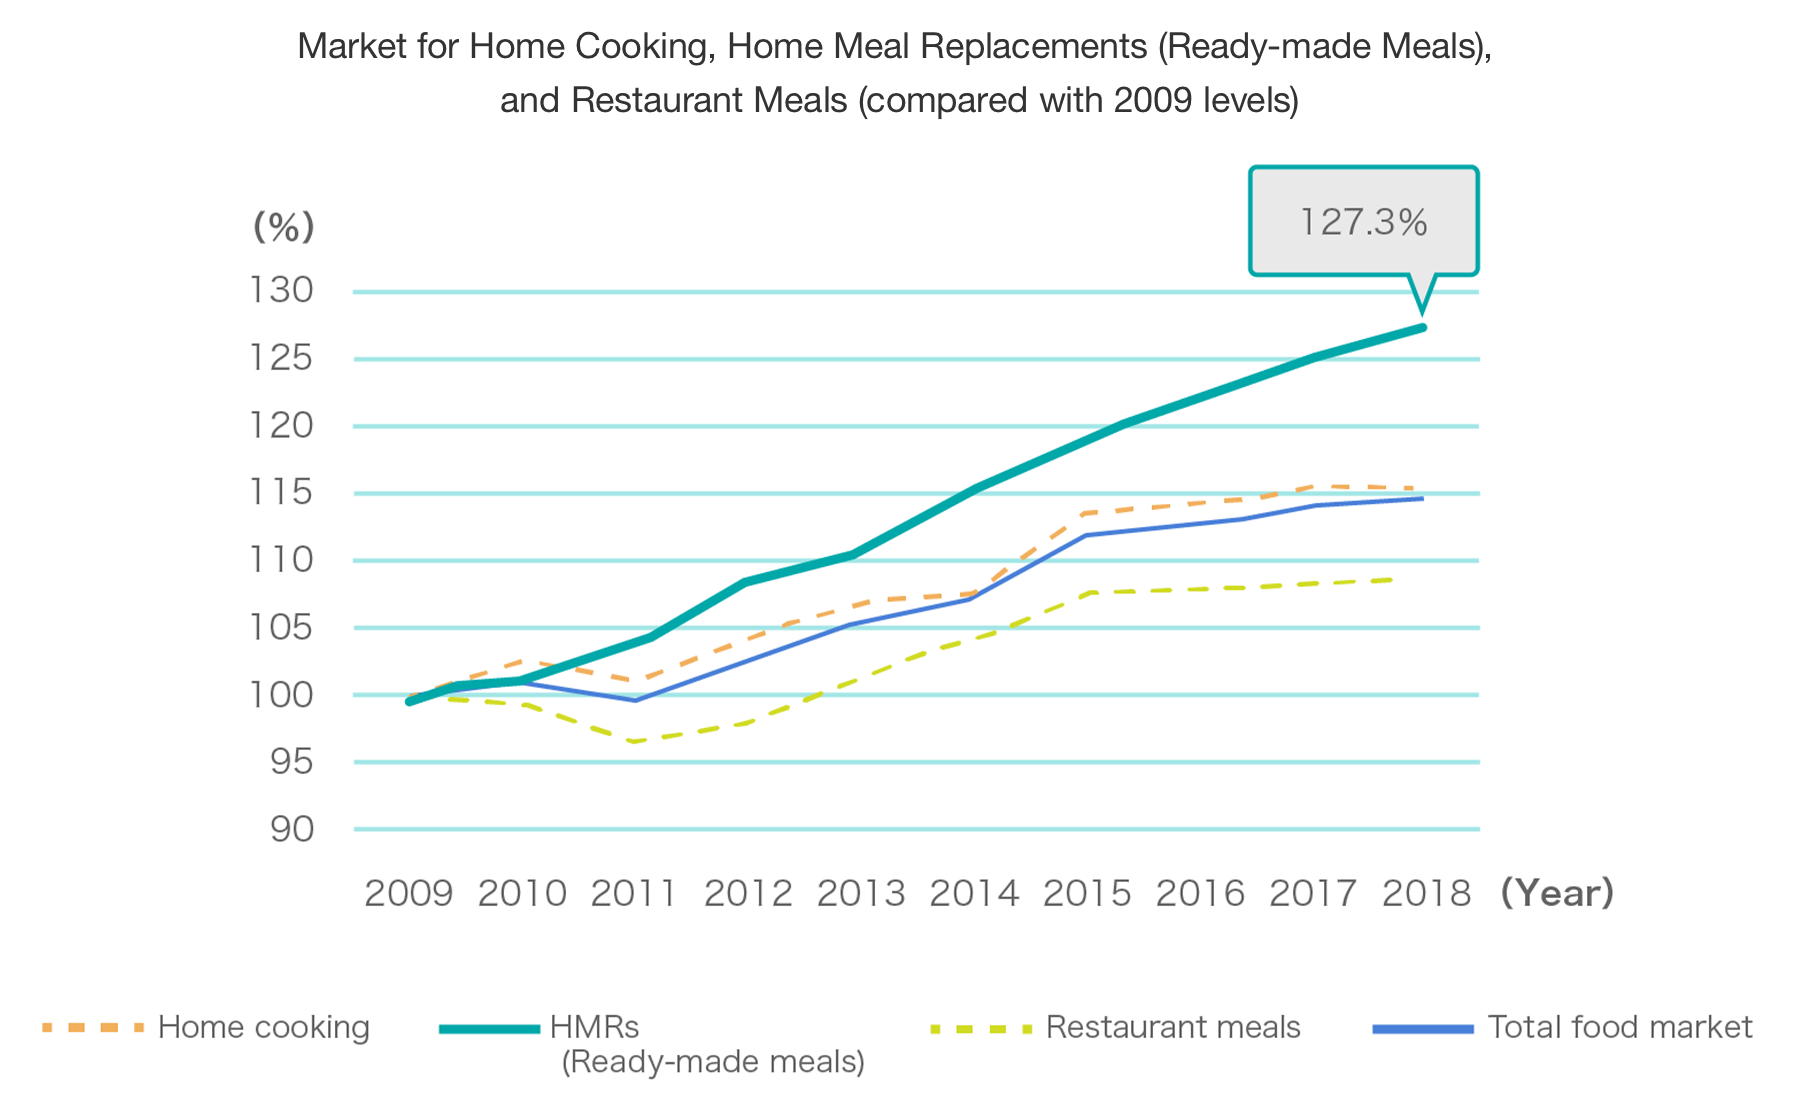 Market for Home Cooking,Home Meal Replacements (Ready-made Meals), and Restaurant Meals (compared with 2009 levels)